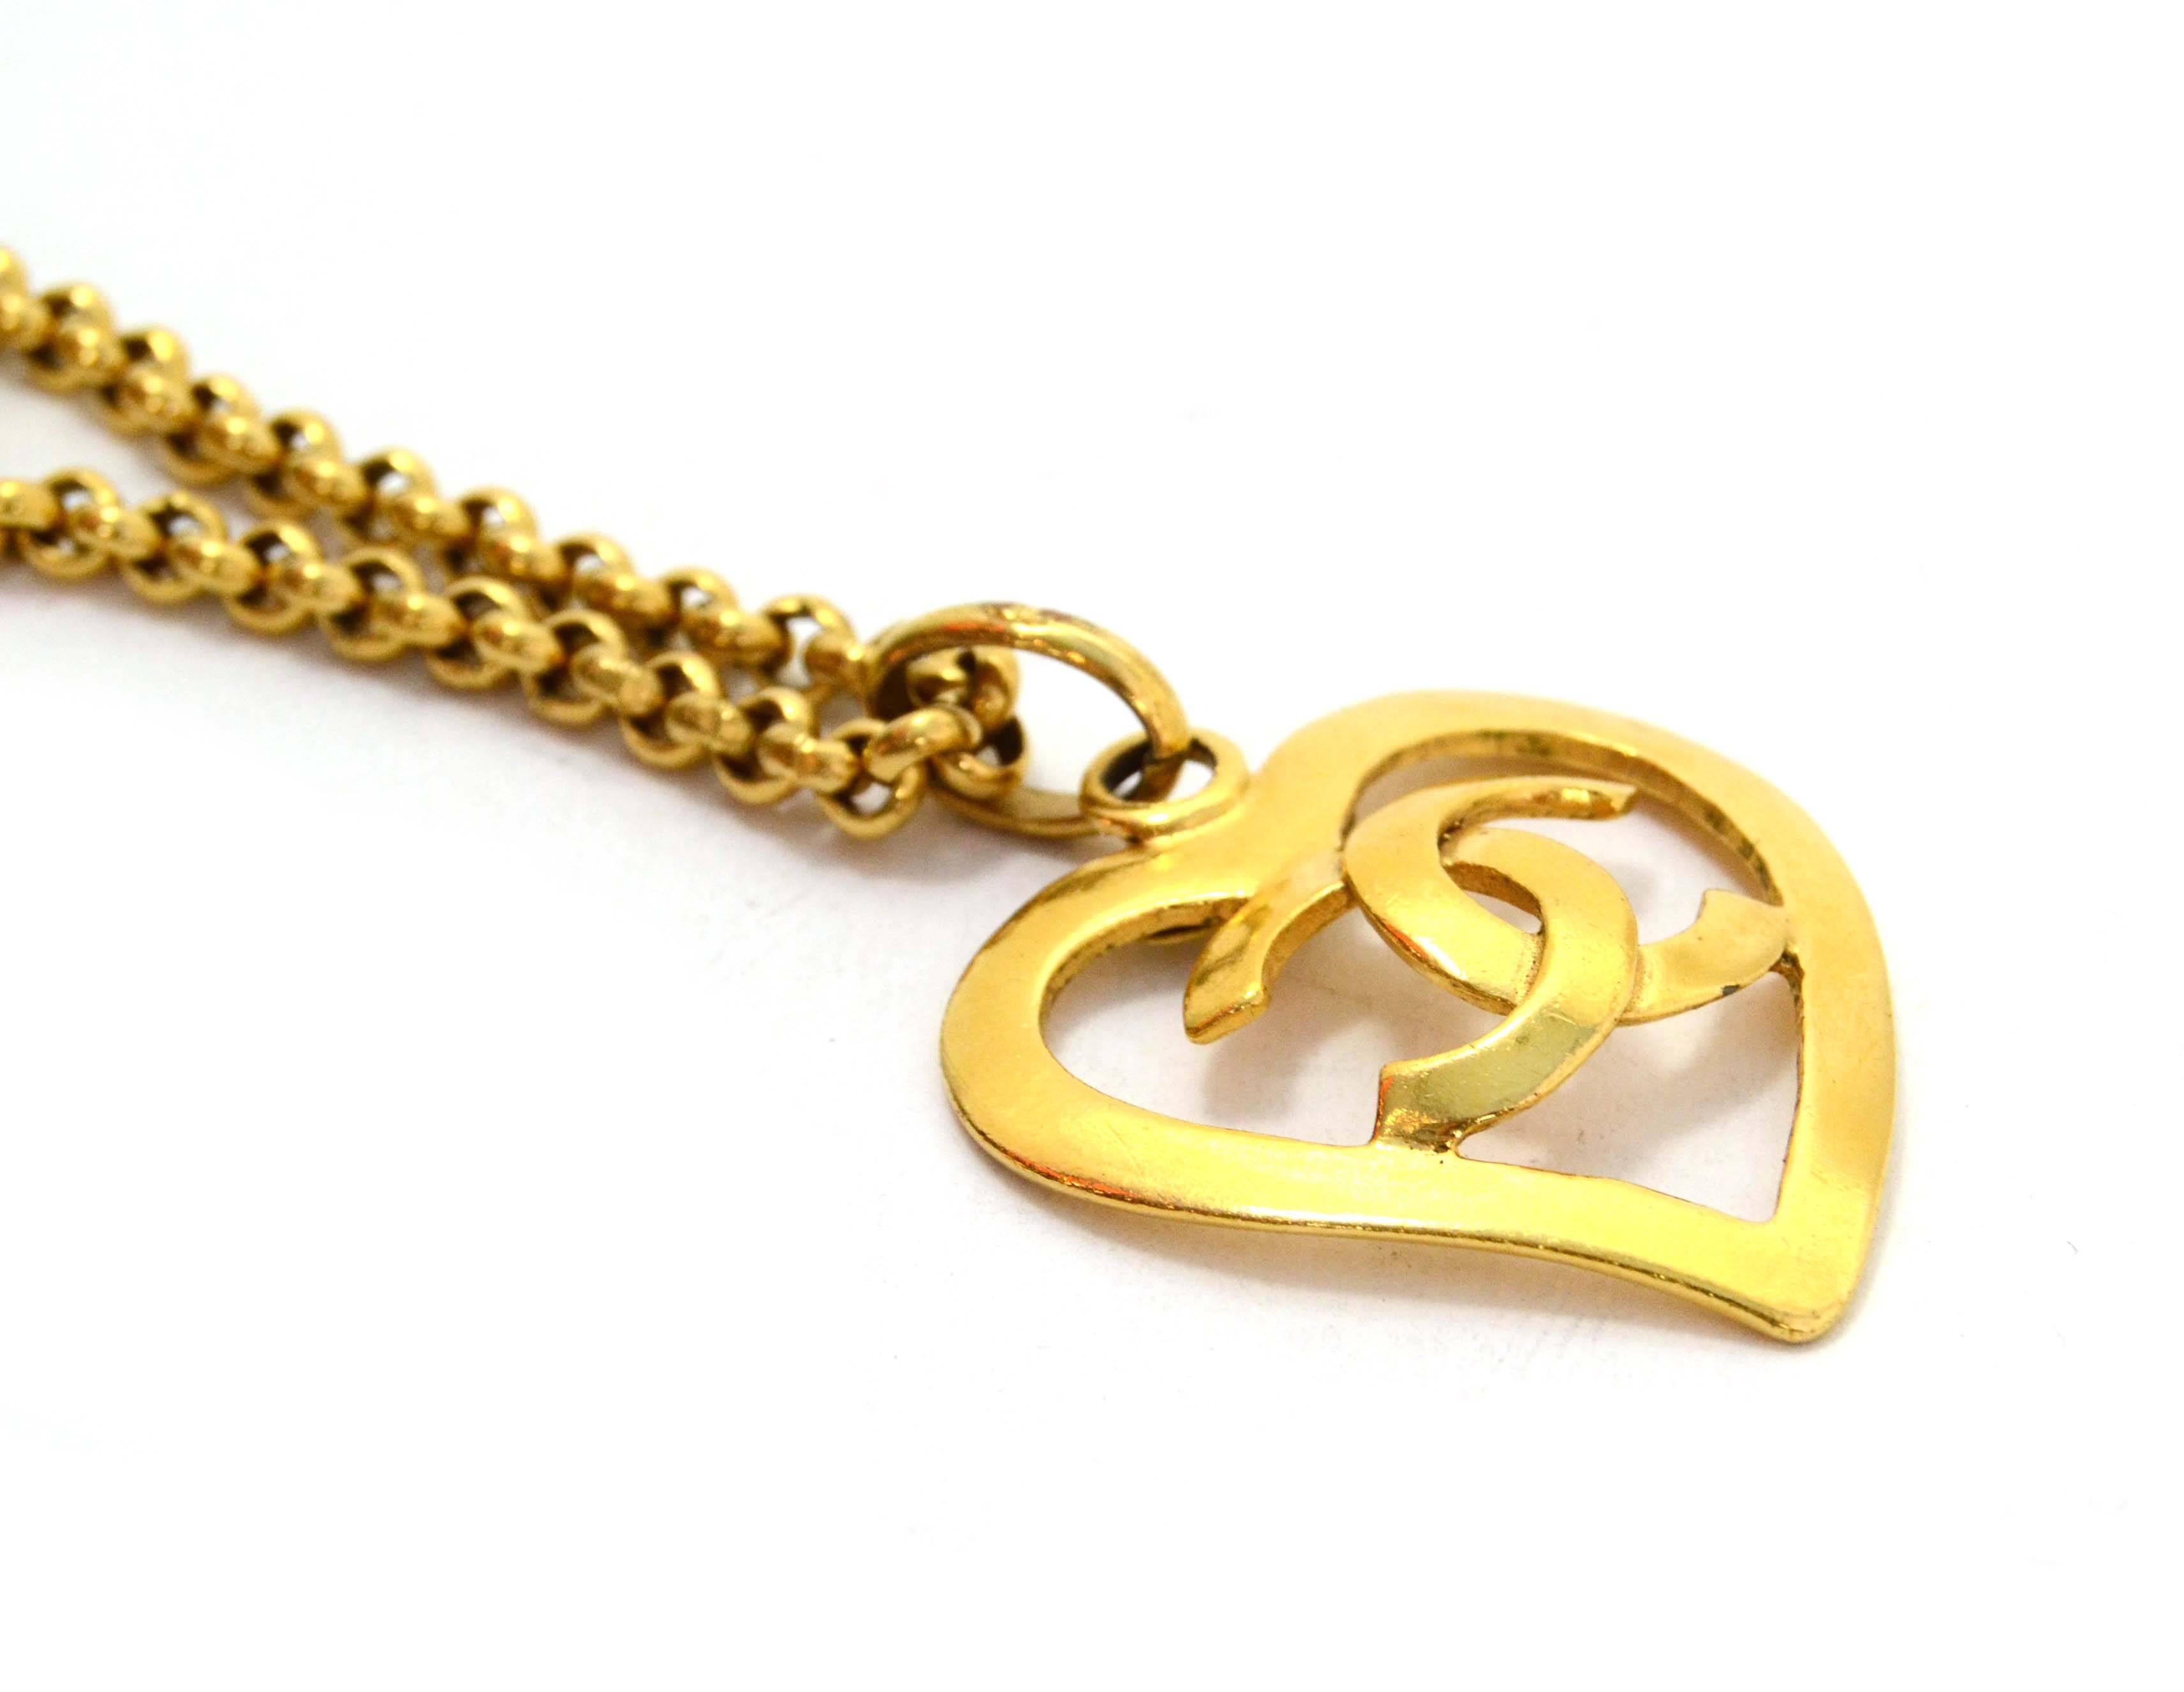 Chanel Vintage ’95 Gold Heart Pendant Necklace 
Features CC in center of heart
Made In:  France
Year of Production: 1995
Color: Goldtone
Materials: Metal
Closure: Jump ring closure
Stamp: 95 CC P
Overall Condition: Excellent vintage,